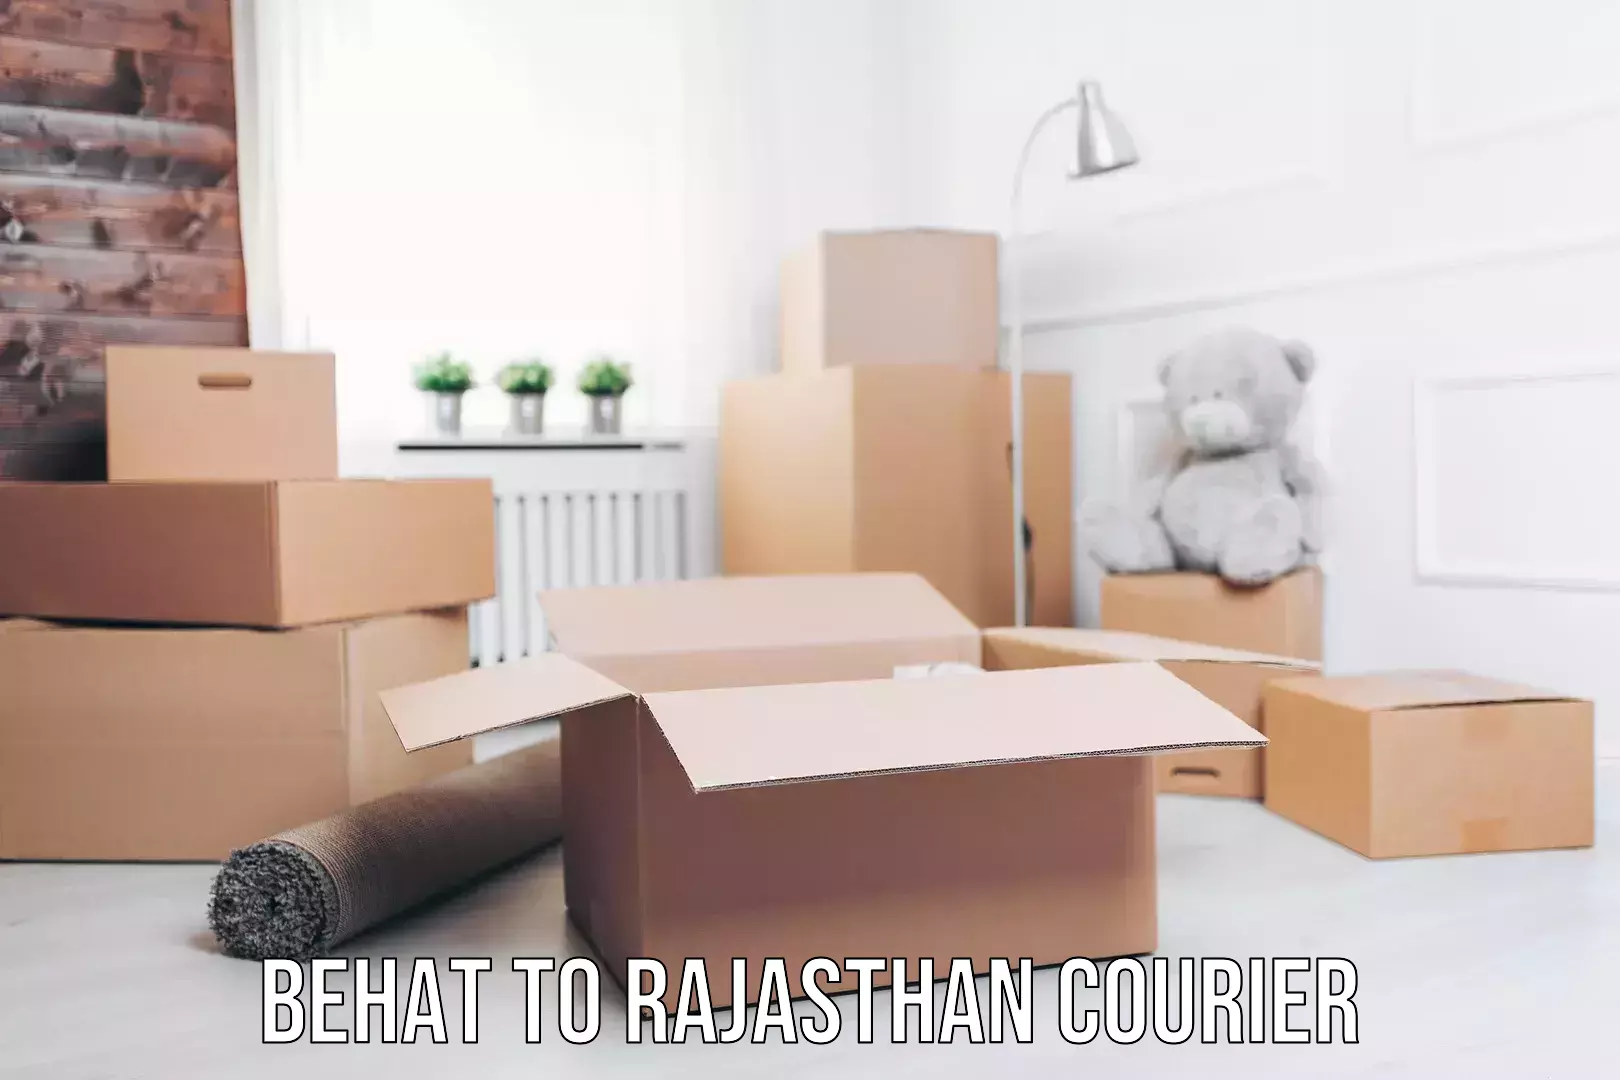 Local delivery service Behat to Rajasthan